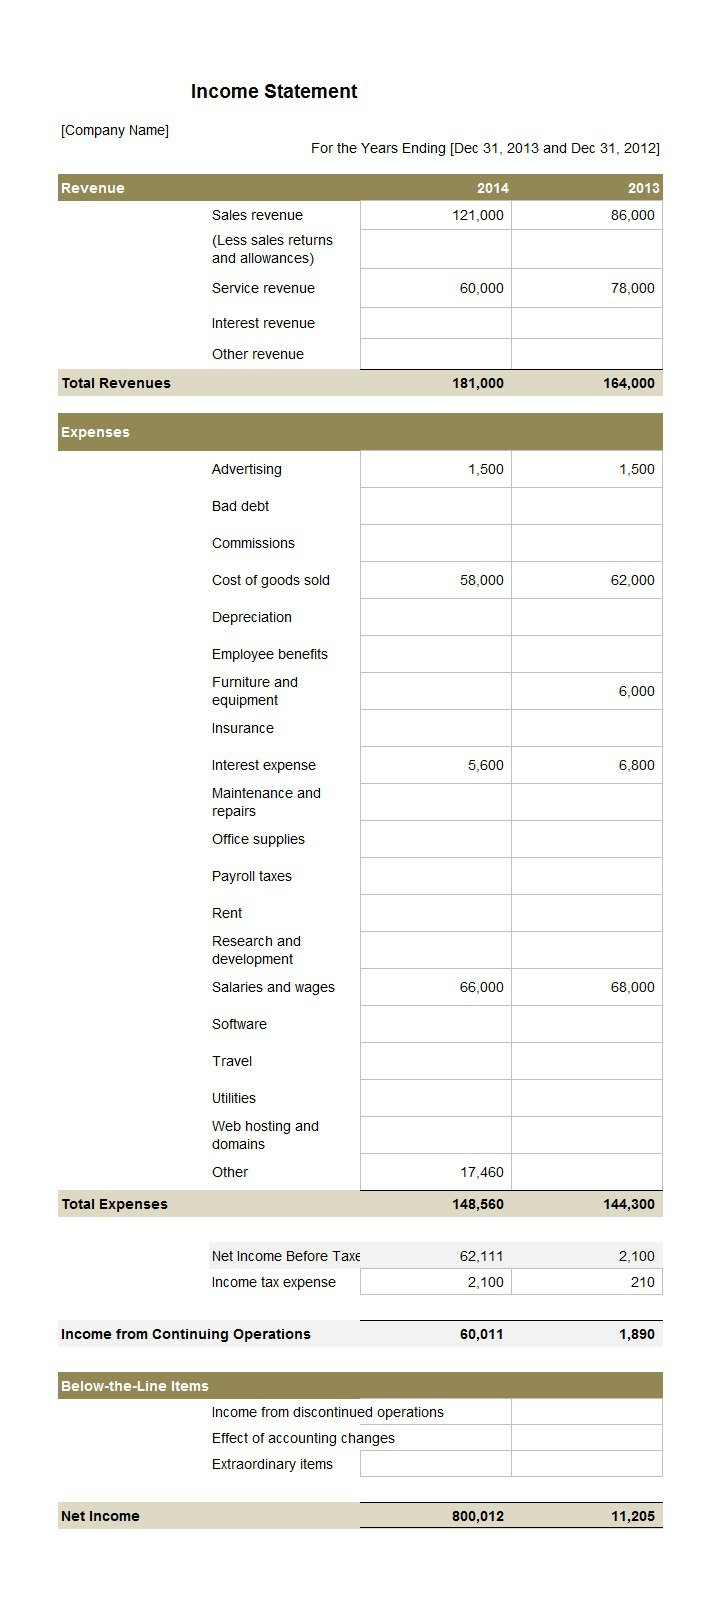 41 Free Income Statement Templates &amp; Examples - Template Lab with Pro Forma Income Statement Generator